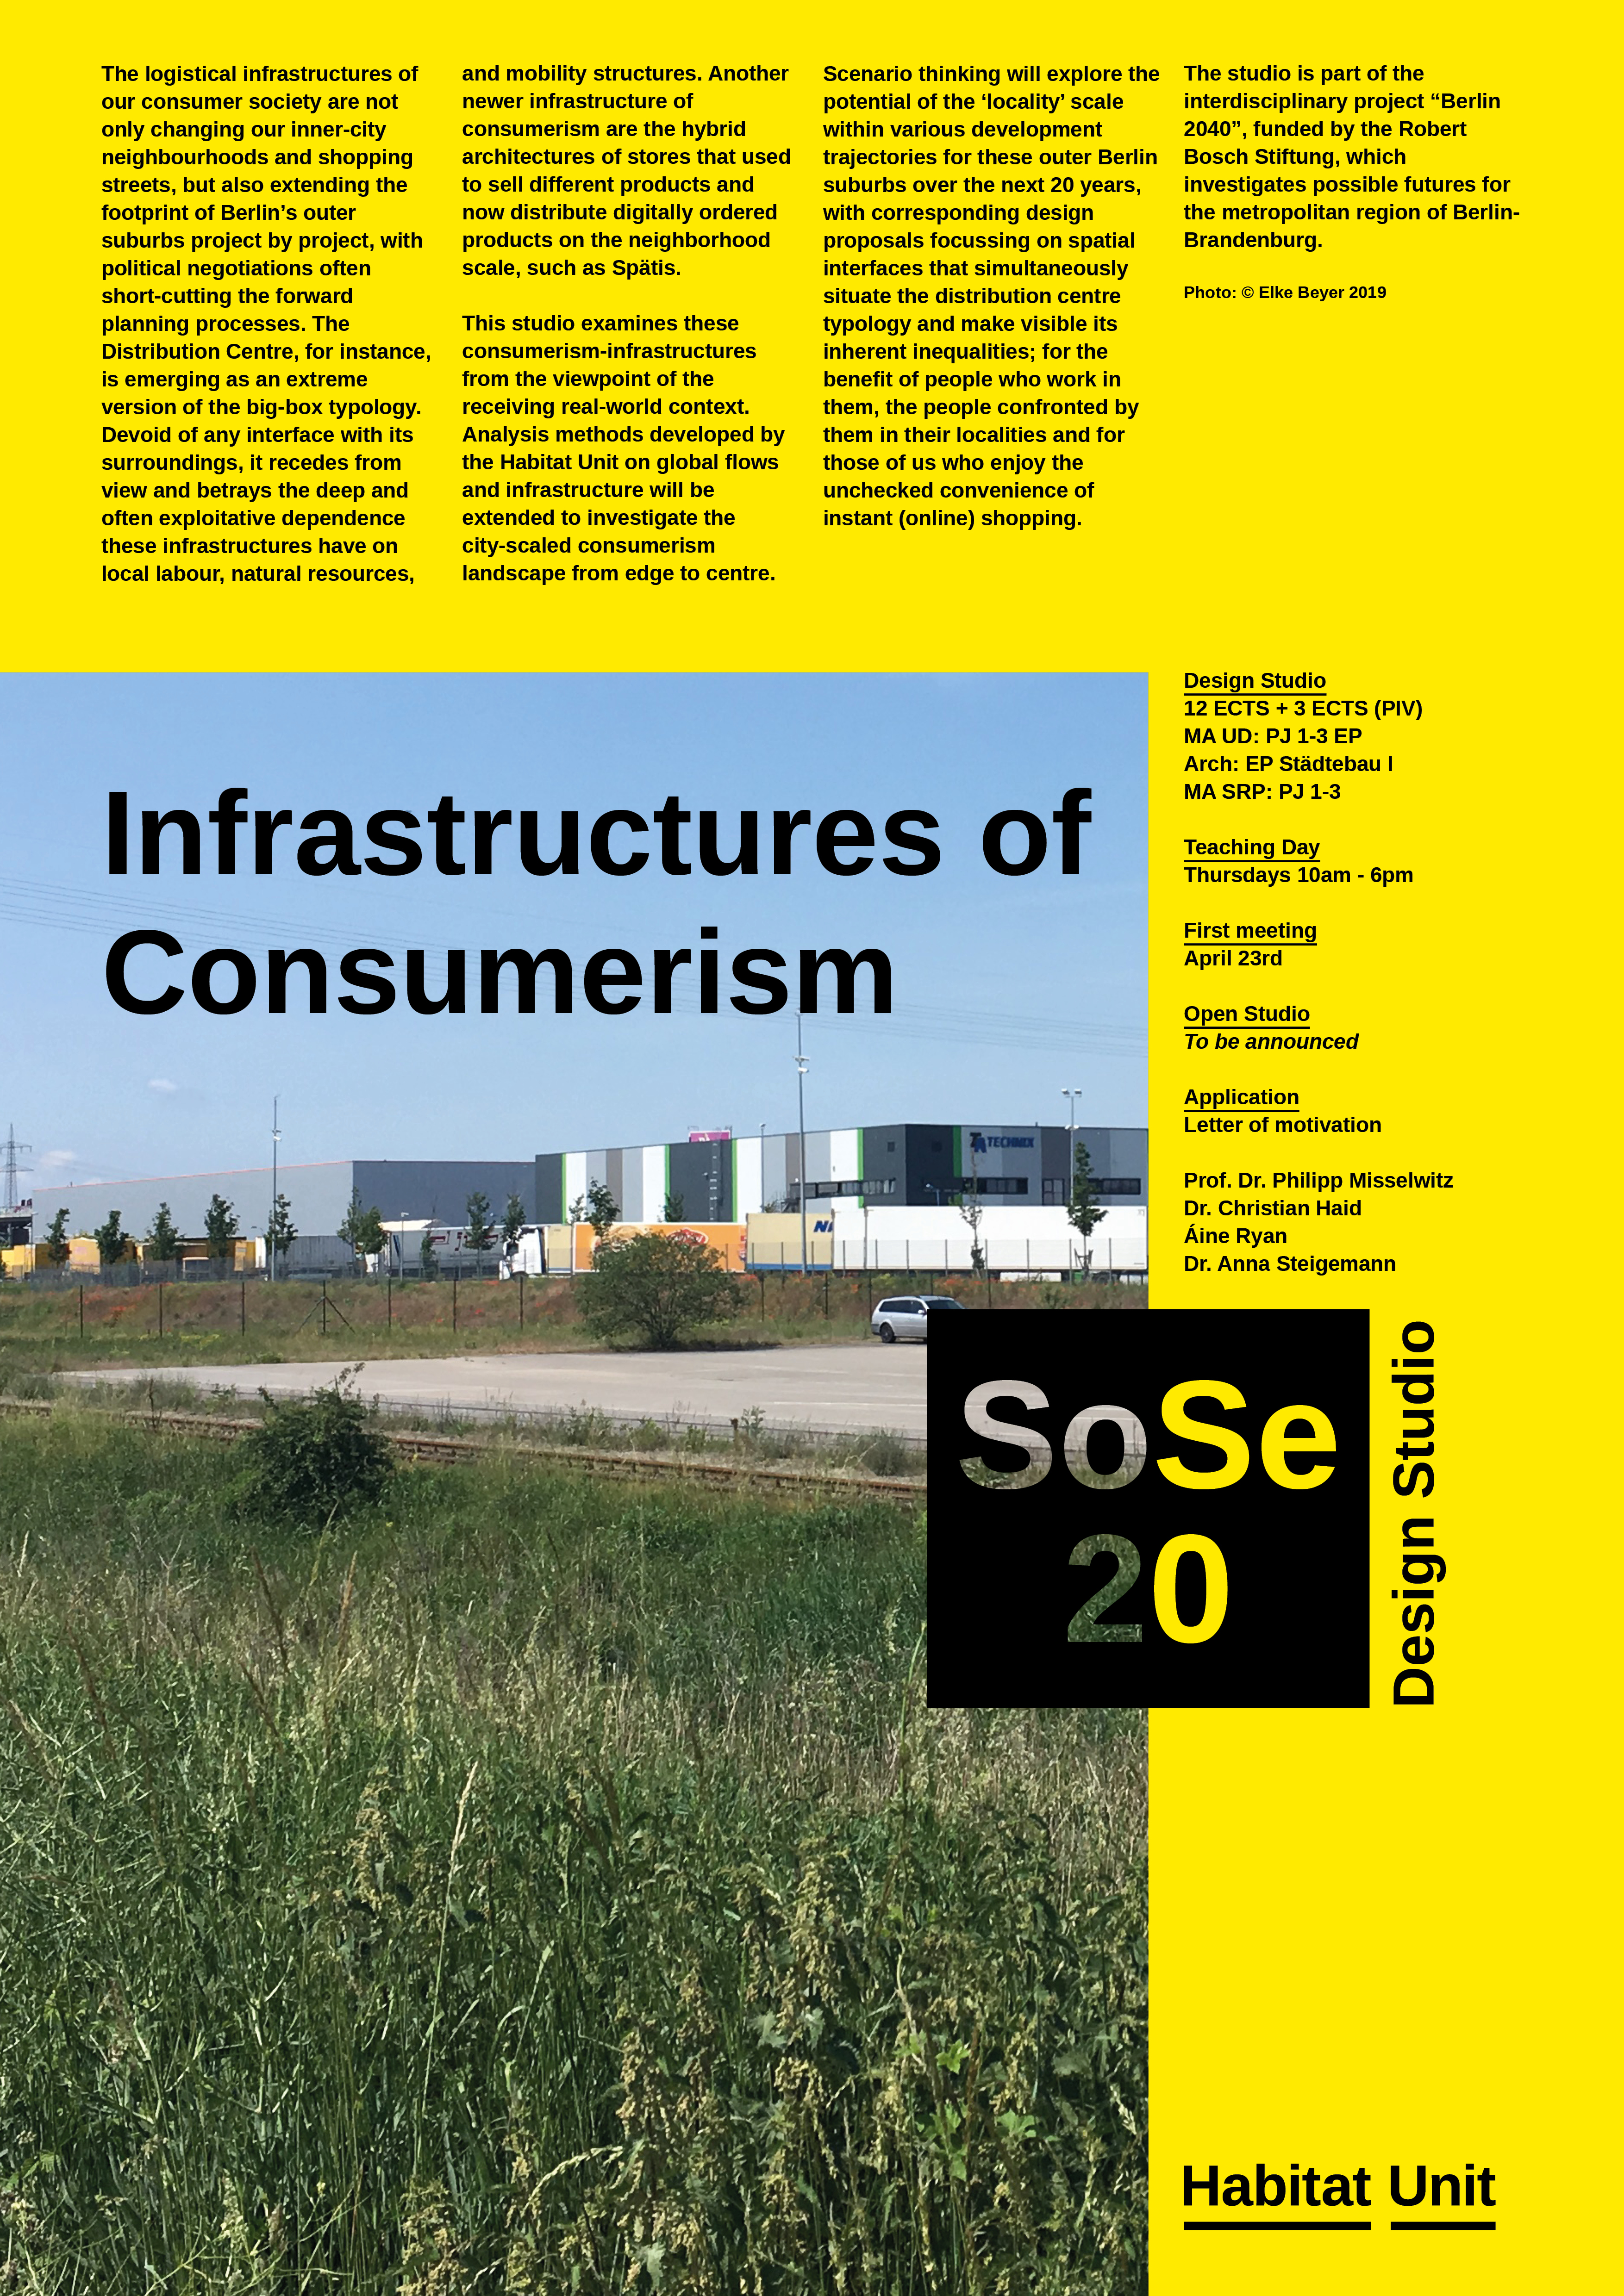 Infrastructures of Consumerism Poster